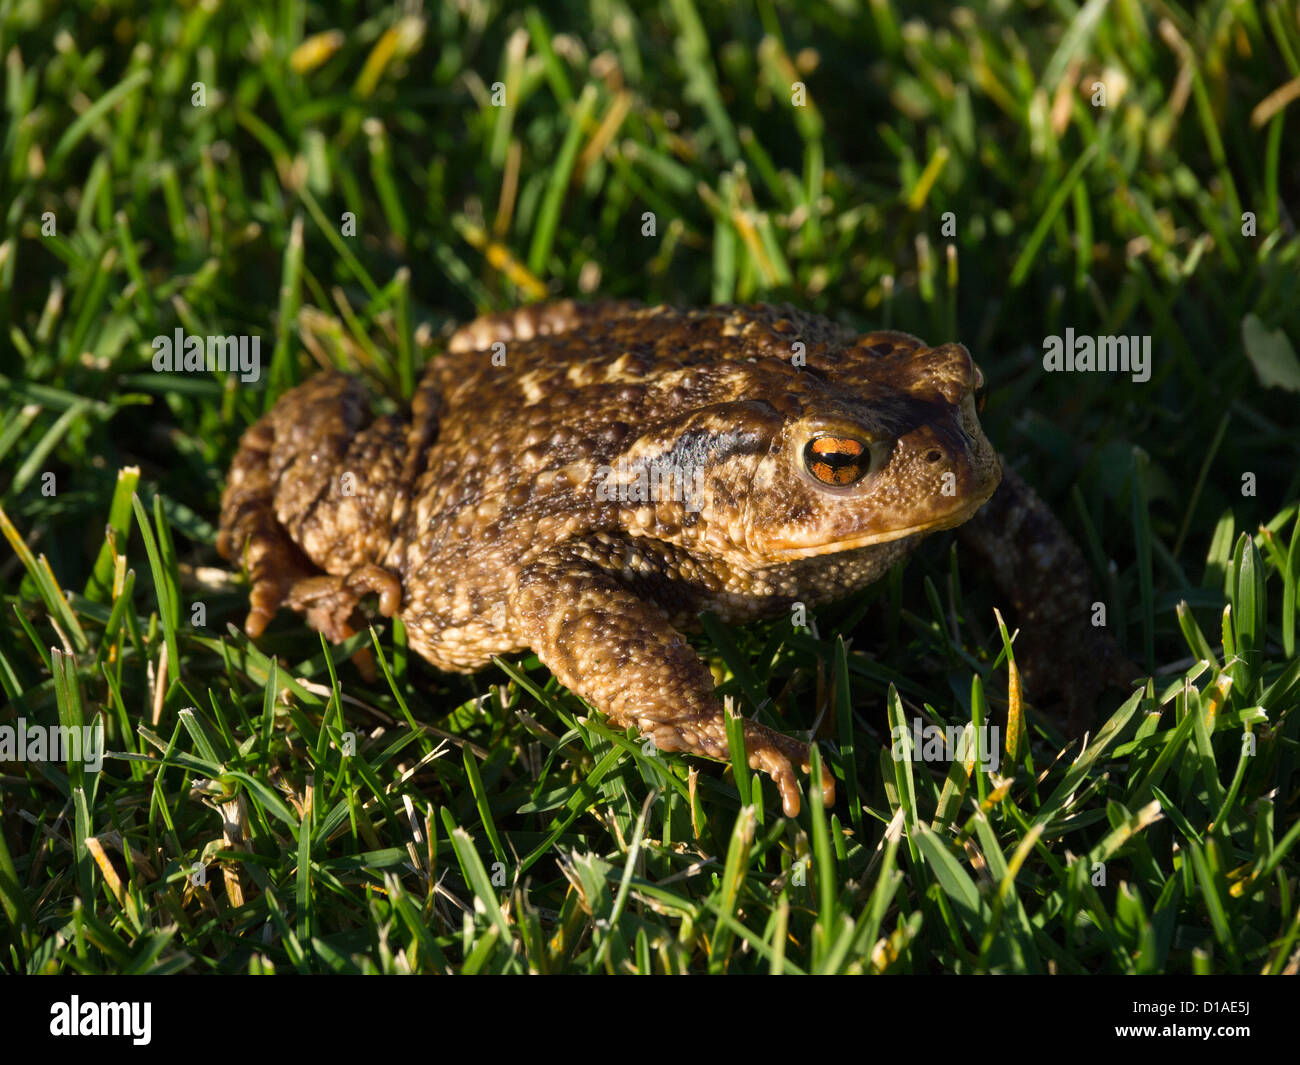 European common toad (bufo bufo ssp spinosus) on grass Stock Photo